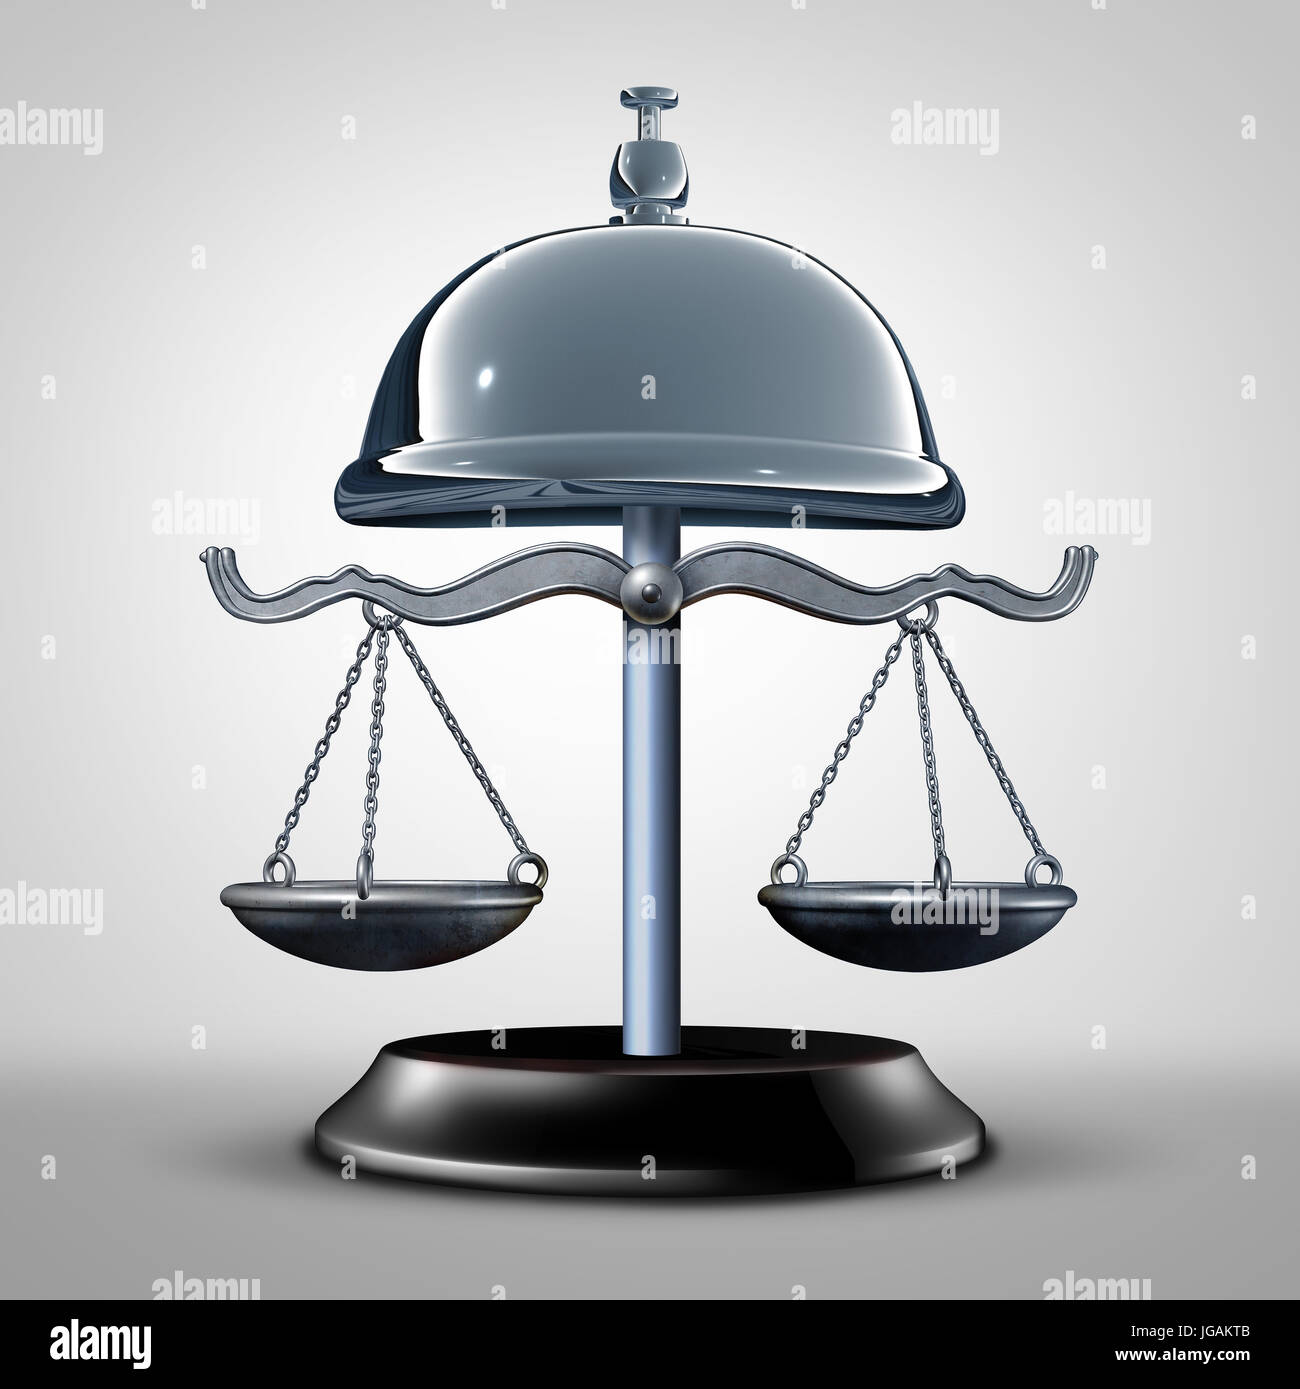 Law service and consumer protection services and attorney or lawyer advice concept as a justice scale shaped as a help bell as a 3D illustration. Stock Photo